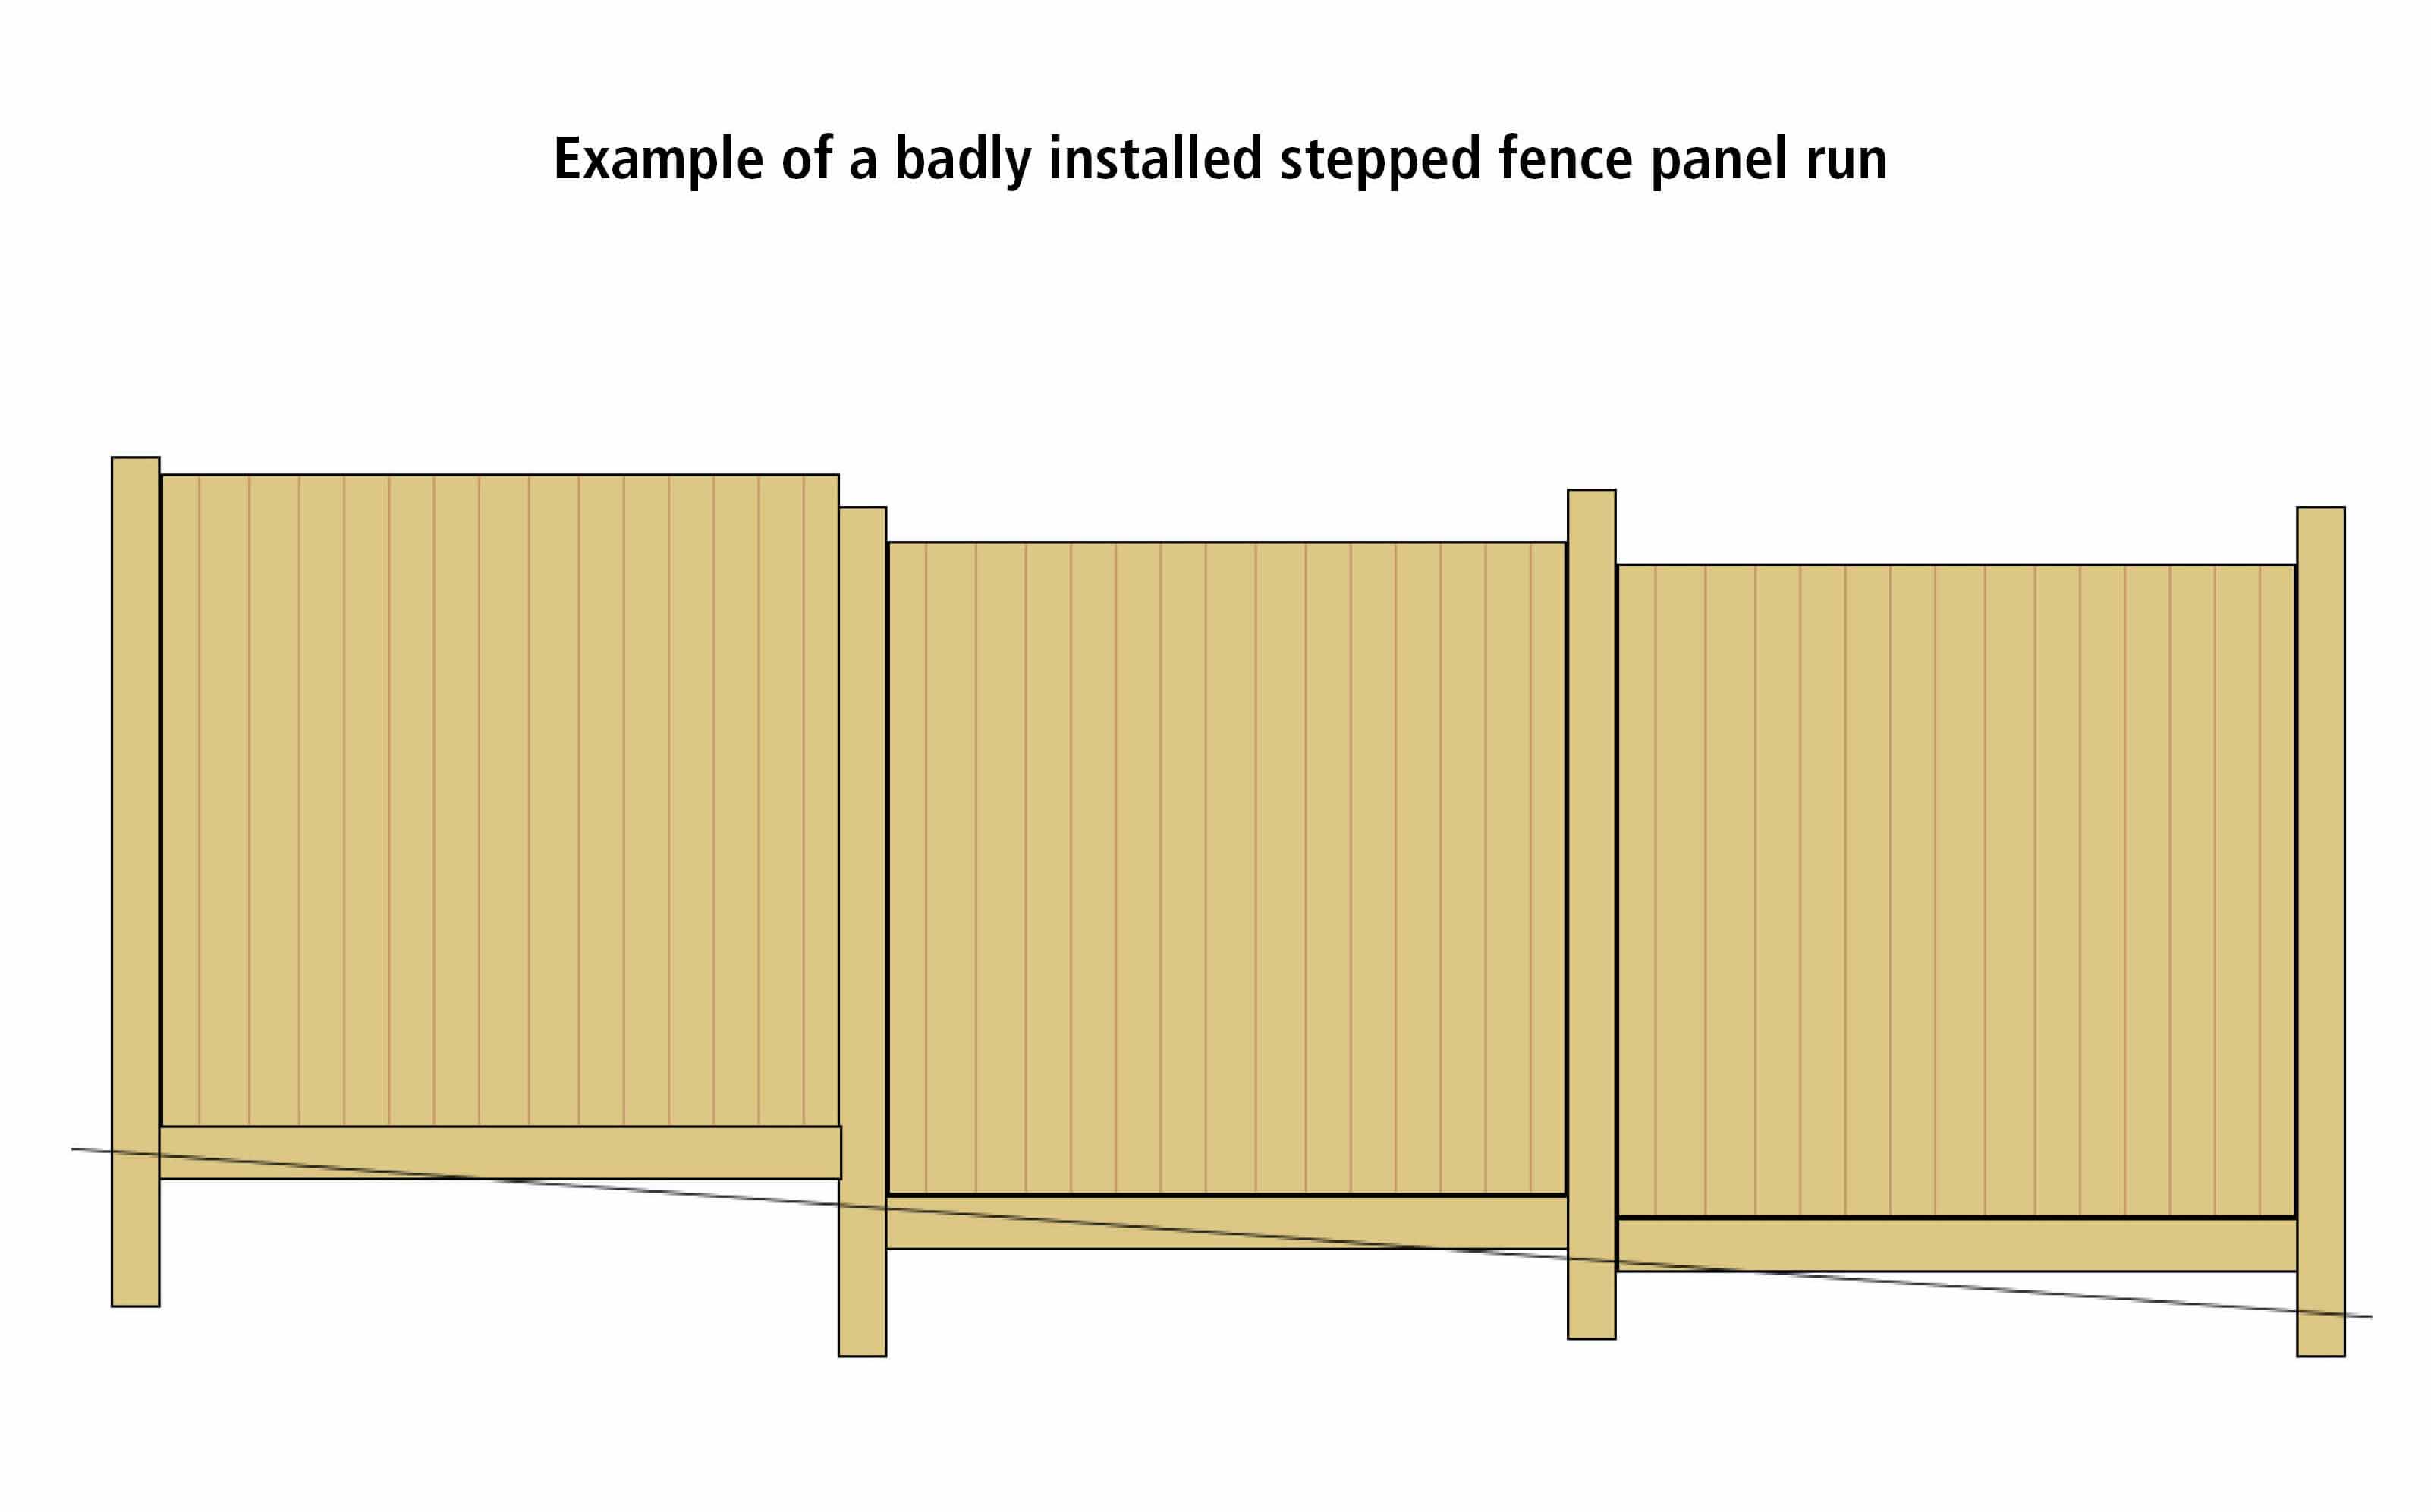 Badly installed stepped fence panel run